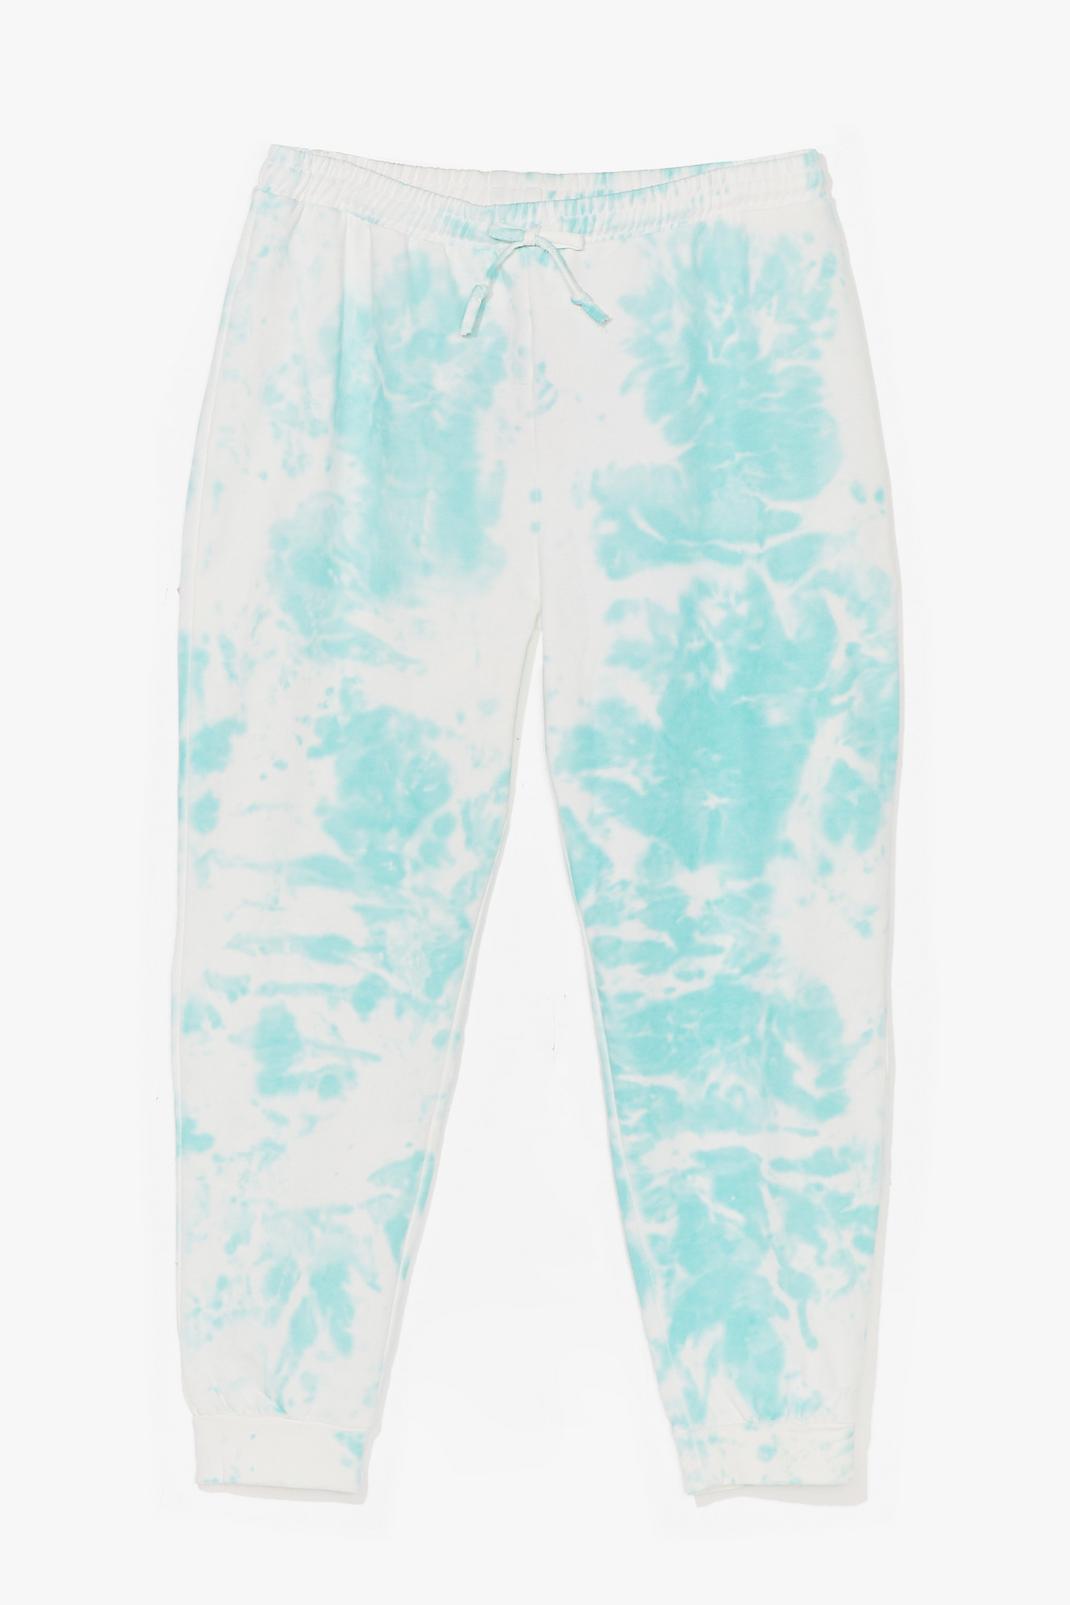 Mint You're All Tie Want Plus Tie Dye Tracksuit Pants image number 1